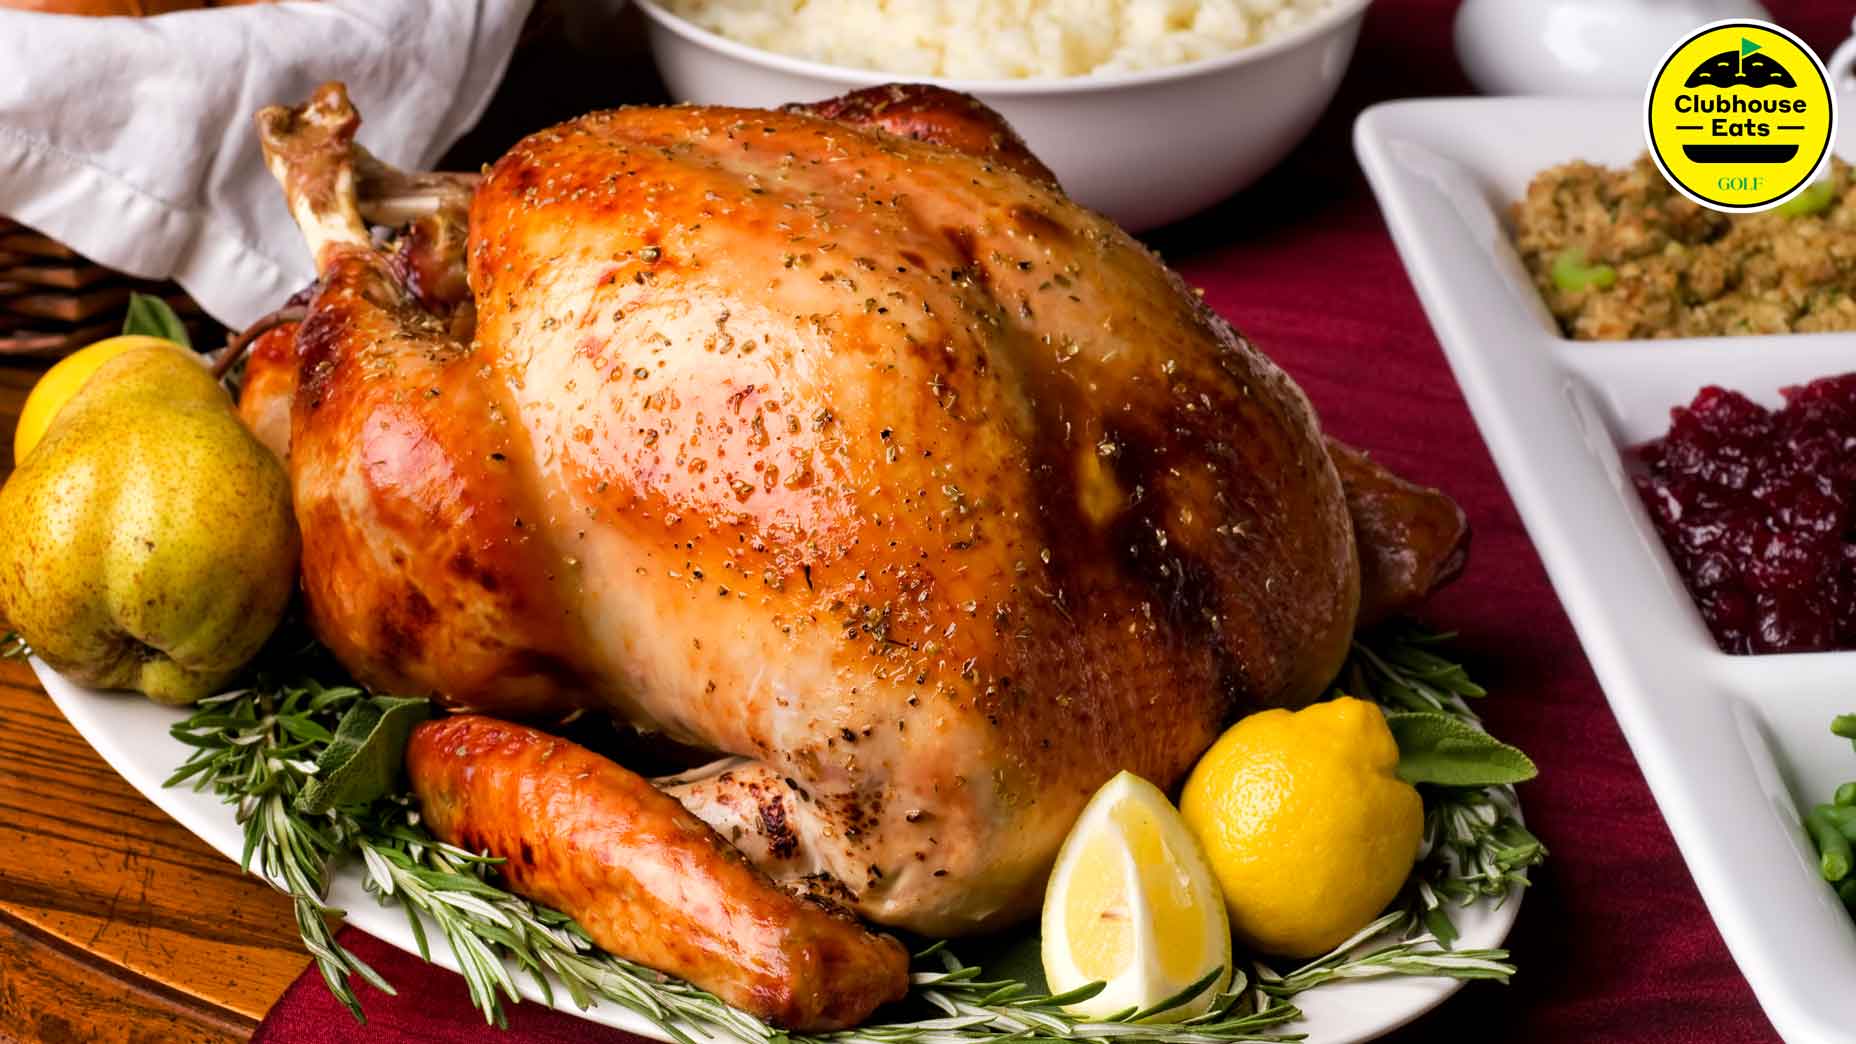 How to cook a perfect Thanksgiving turkey, according to a Michelin